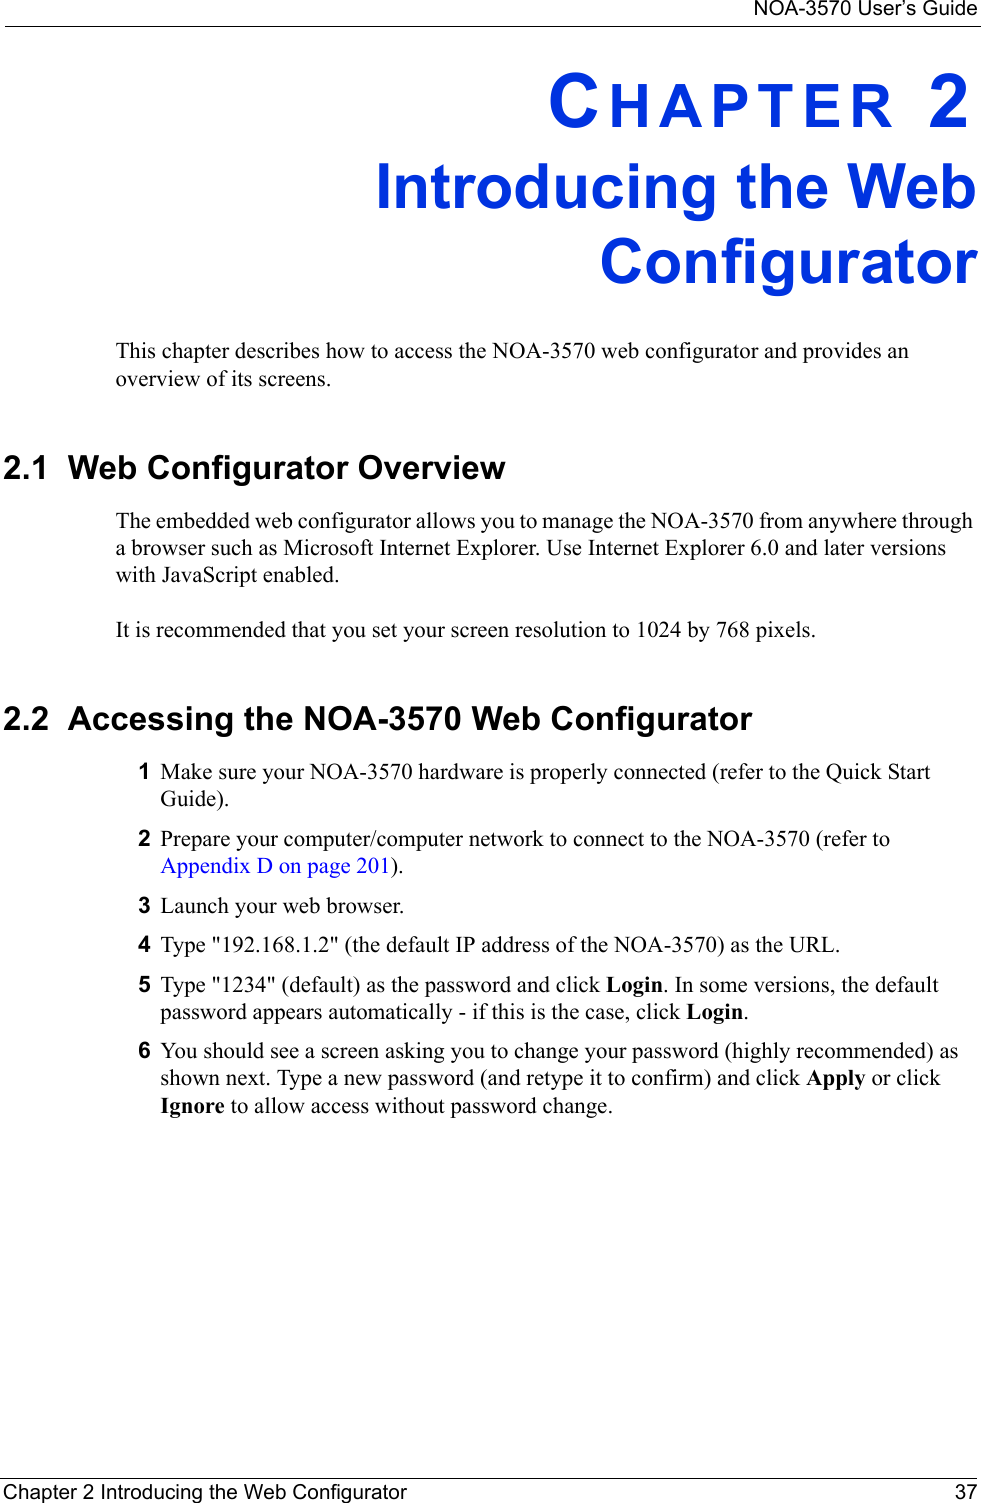 NOA-3570 User’s GuideChapter 2 Introducing the Web Configurator 37CHAPTER 2Introducing the WebConfiguratorThis chapter describes how to access the NOA-3570 web configurator and provides an overview of its screens.2.1  Web Configurator OverviewThe embedded web configurator allows you to manage the NOA-3570 from anywhere through a browser such as Microsoft Internet Explorer. Use Internet Explorer 6.0 and later versions with JavaScript enabled.It is recommended that you set your screen resolution to 1024 by 768 pixels.2.2  Accessing the NOA-3570 Web Configurator1Make sure your NOA-3570 hardware is properly connected (refer to the Quick Start Guide).2Prepare your computer/computer network to connect to the NOA-3570 (refer to Appendix D on page 201).3Launch your web browser.4Type &quot;192.168.1.2&quot; (the default IP address of the NOA-3570) as the URL. 5Type &quot;1234&quot; (default) as the password and click Login. In some versions, the default password appears automatically - if this is the case, click Login. 6You should see a screen asking you to change your password (highly recommended) as shown next. Type a new password (and retype it to confirm) and click Apply or click Ignore to allow access without password change.